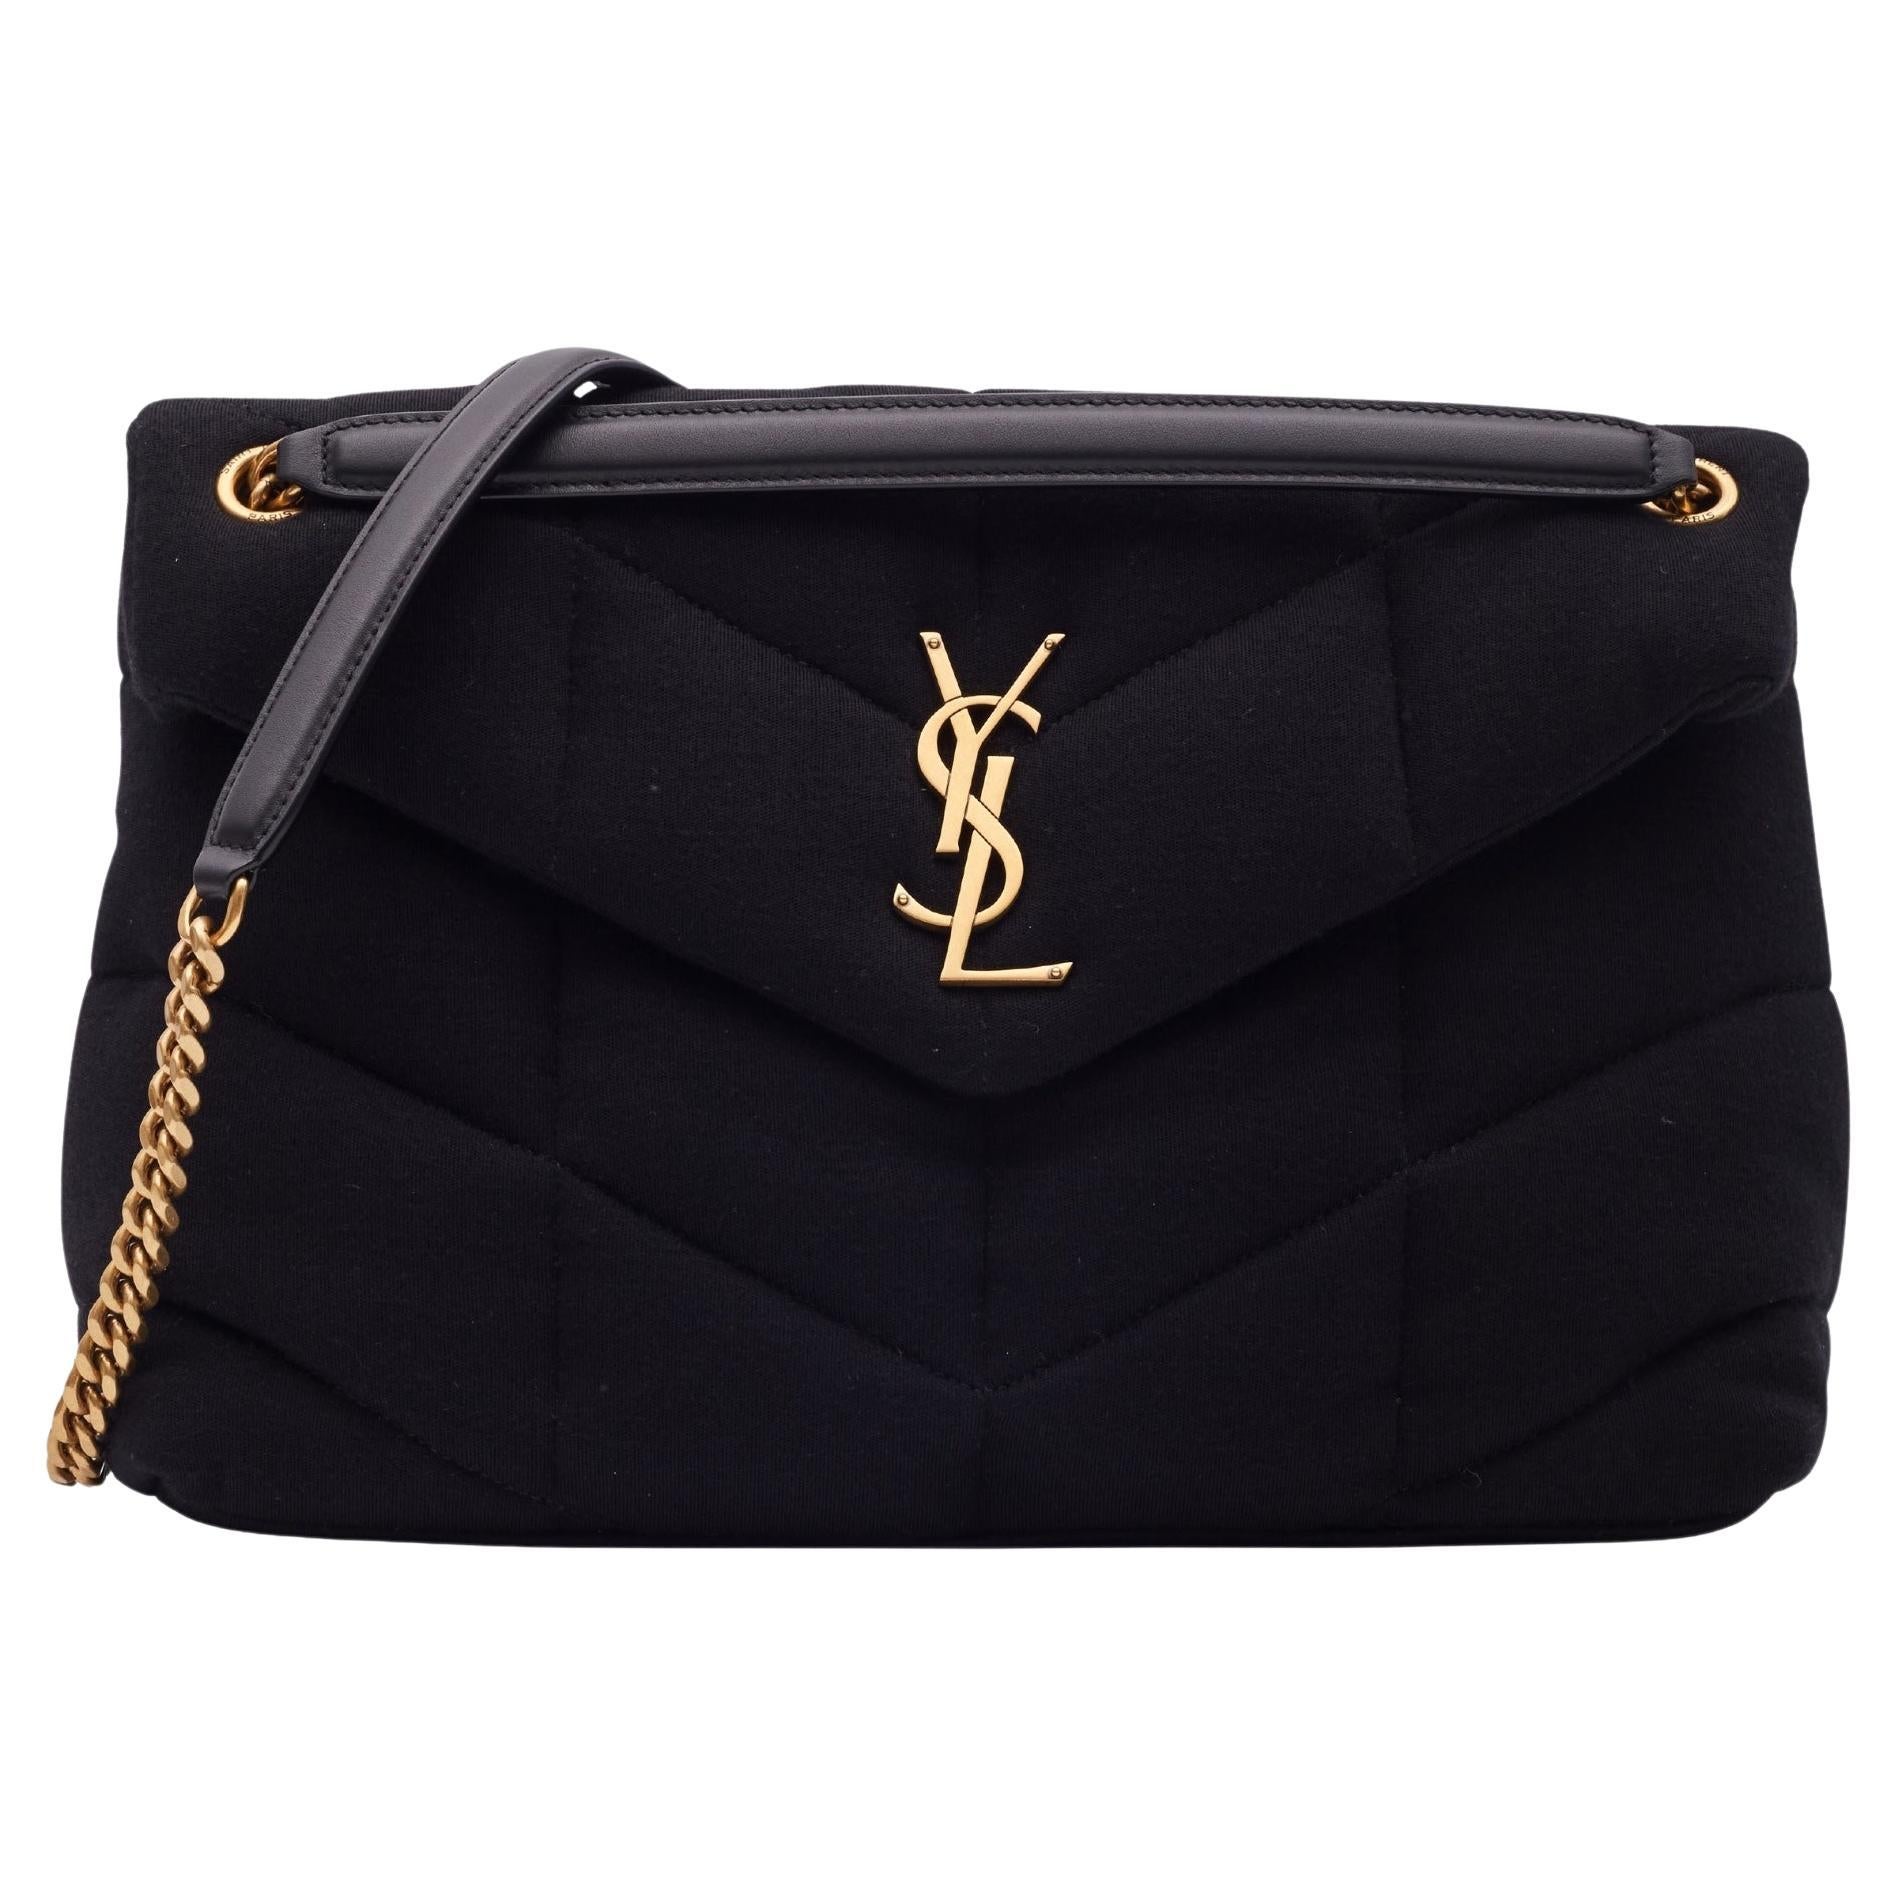 Do Saint Laurent bags have serial numbers?